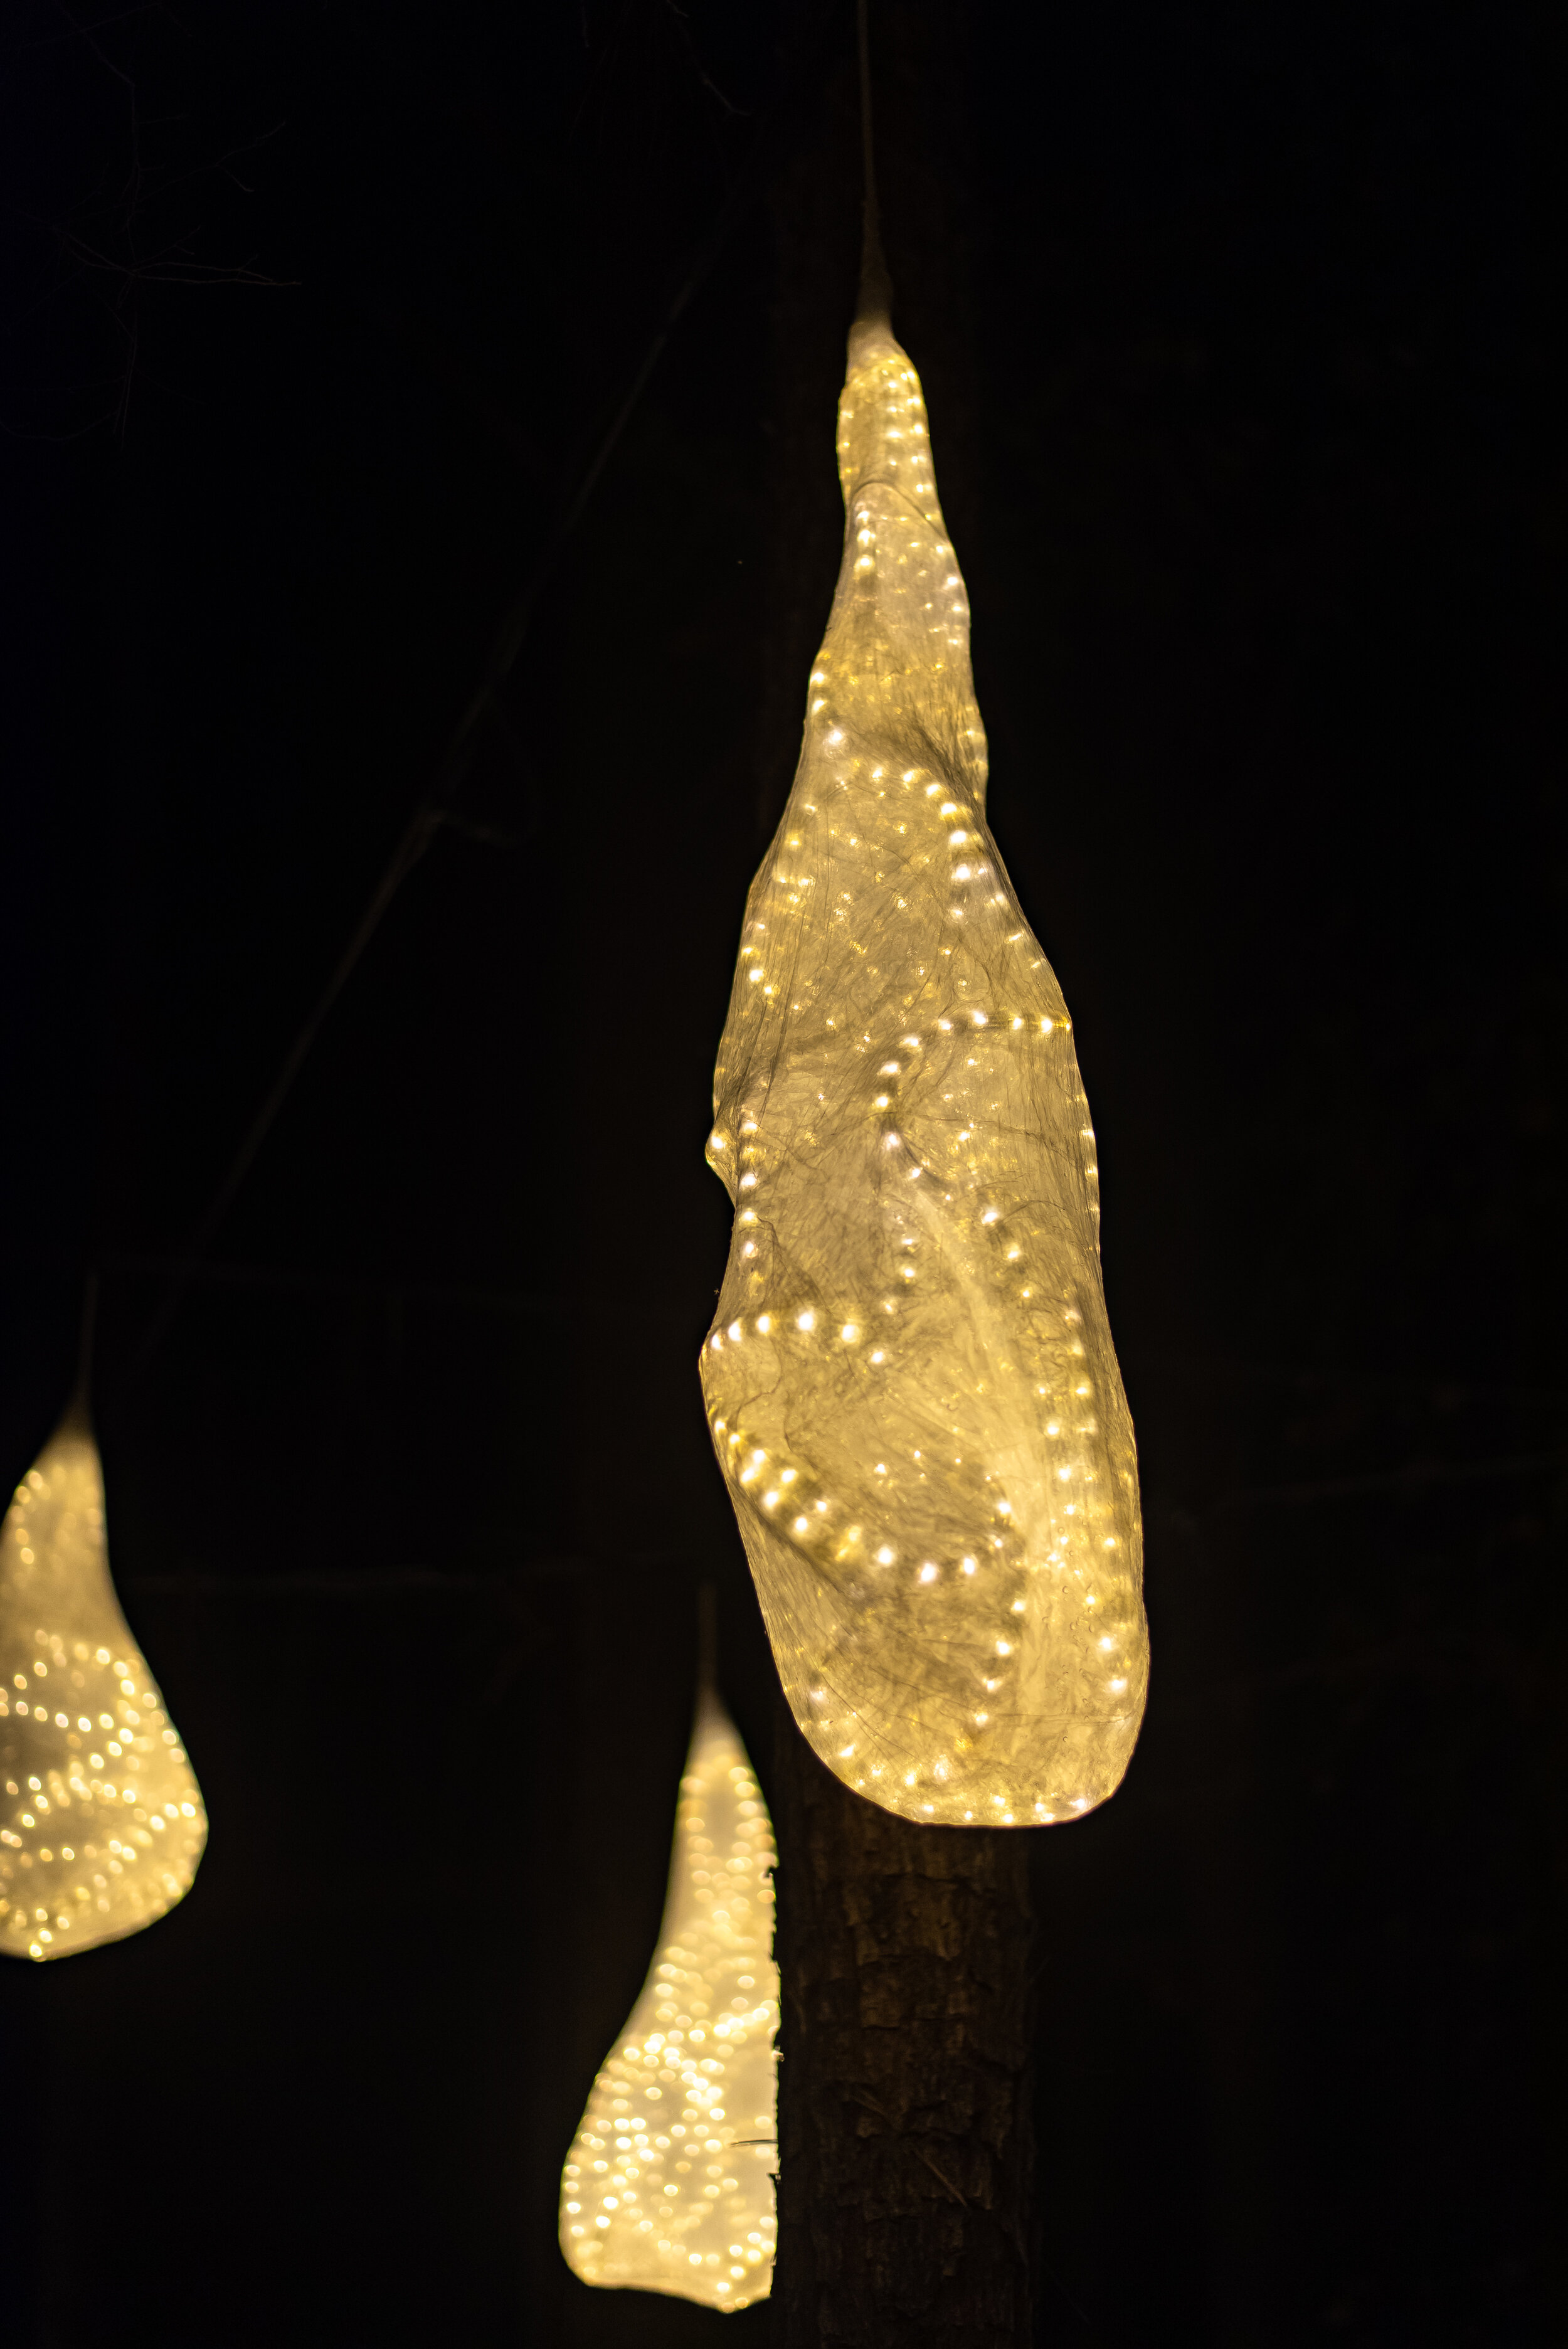 Pods 2019, detail of larger temporary and site-specific installation